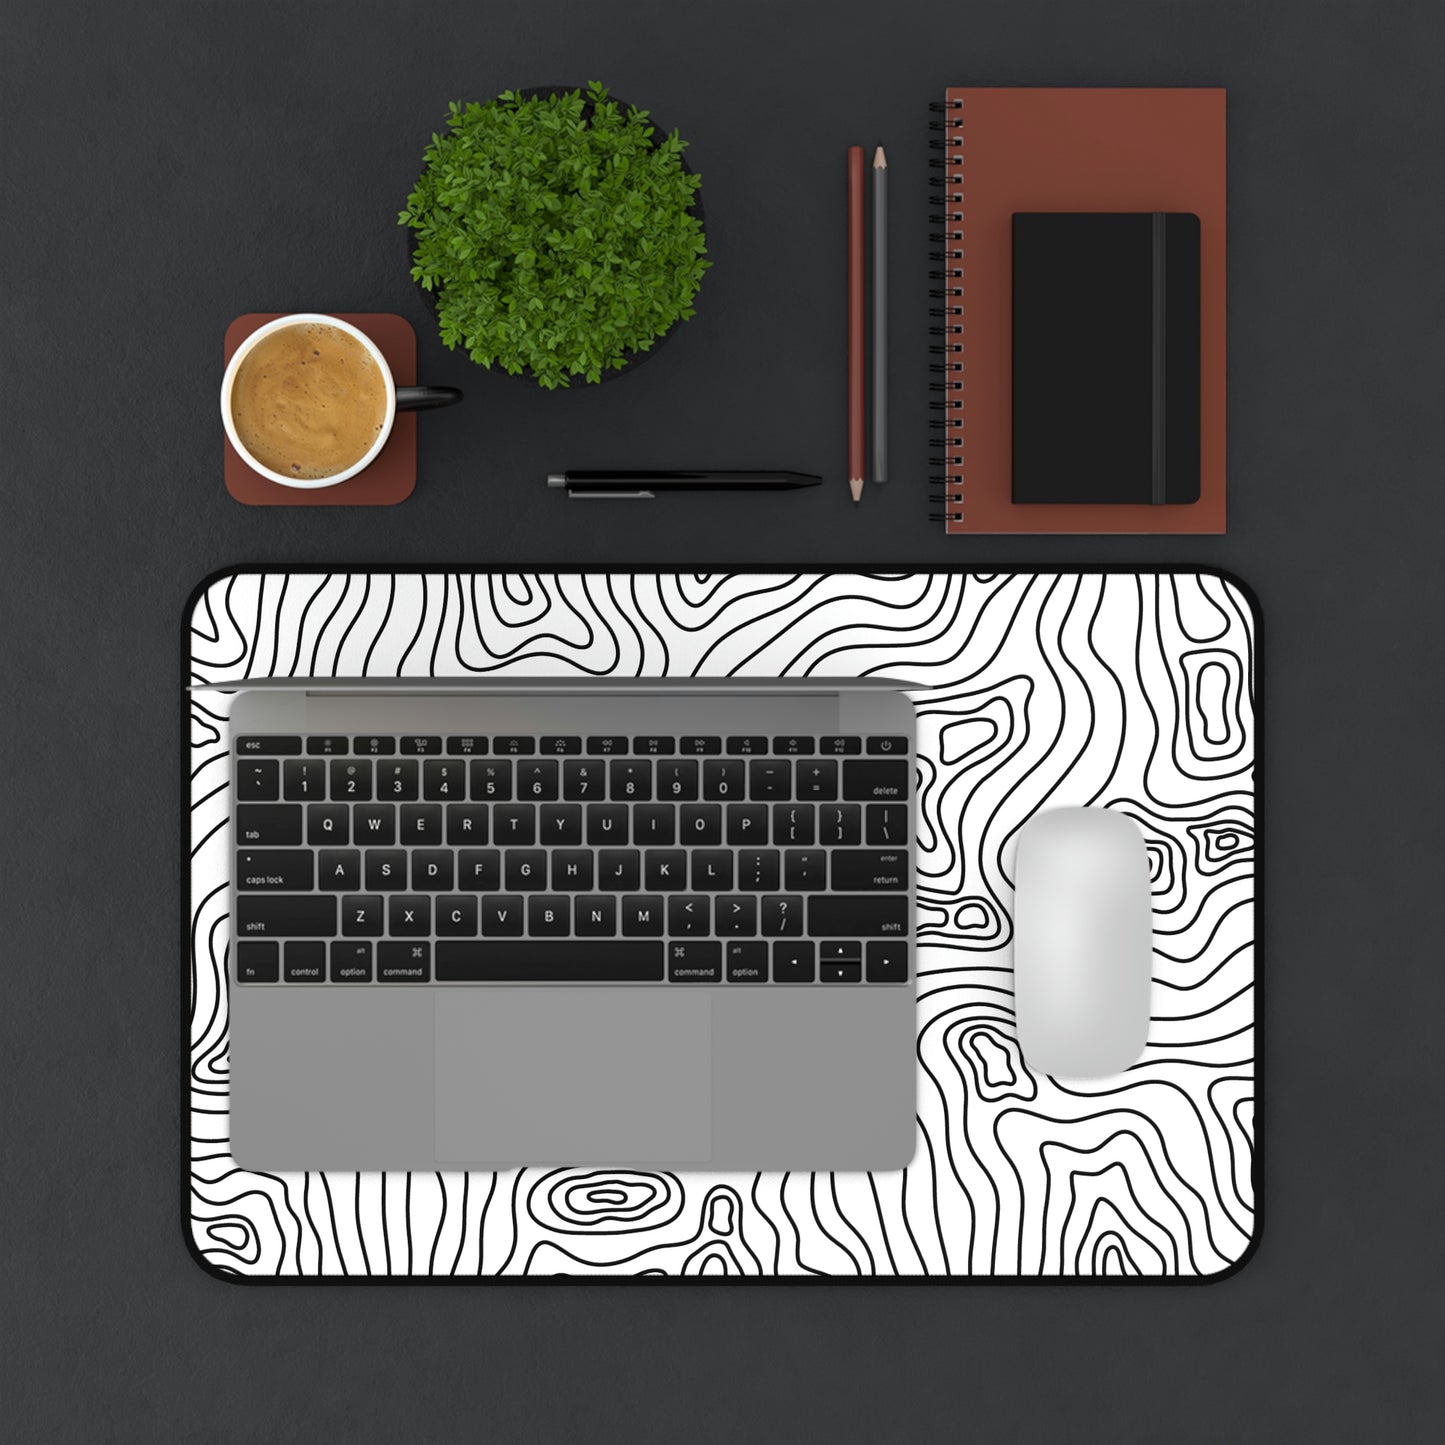 A 12" x 18" white desk mat with black topographic lines. A laptop and mouse sit on top of it.